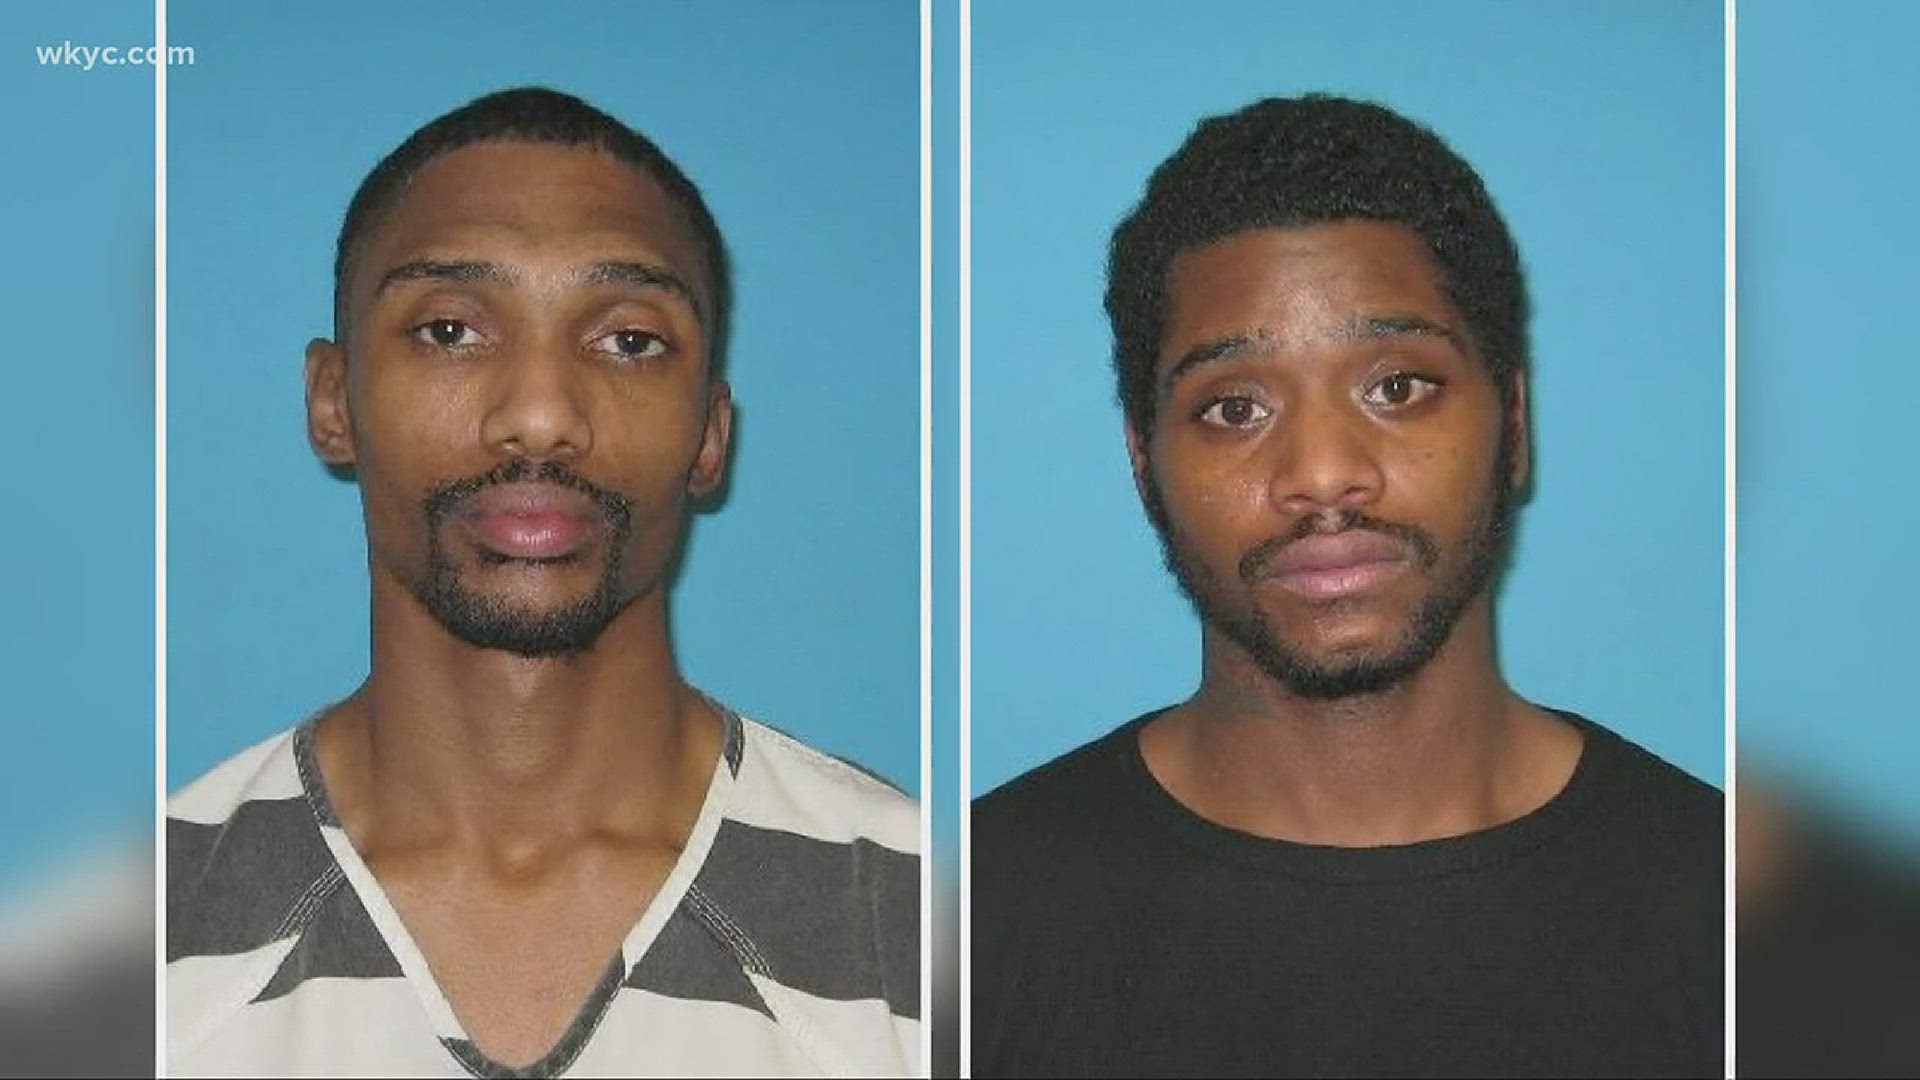 Two men have been arrested after a Lorain County home invasion